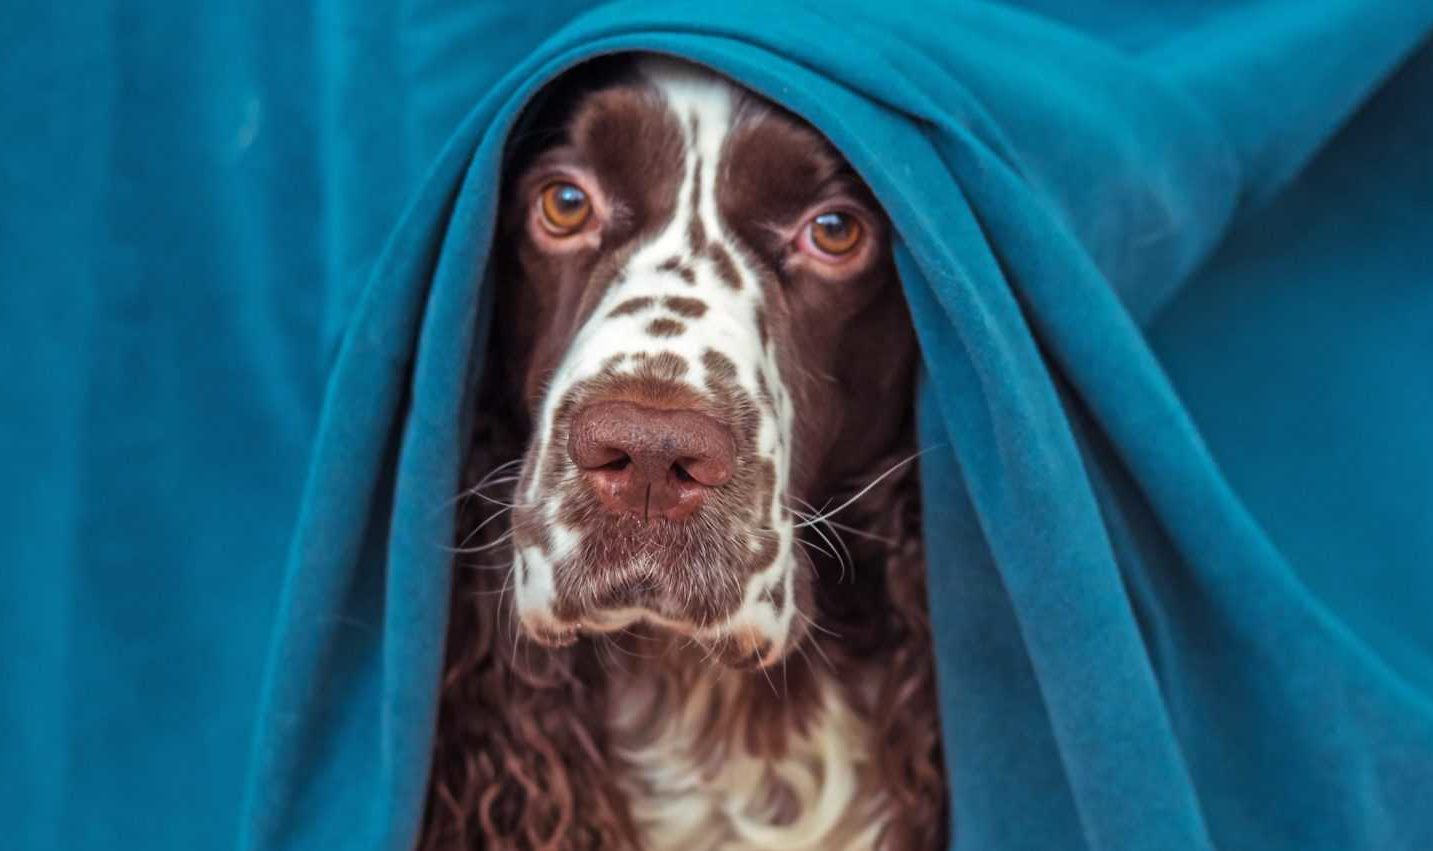 Fearful Springer Spaniel hides under a table. Calming vitamins help dogs suffering from separation anxiety or coping with fear caused by thunderstorms, fireworks, or trips to the vet.